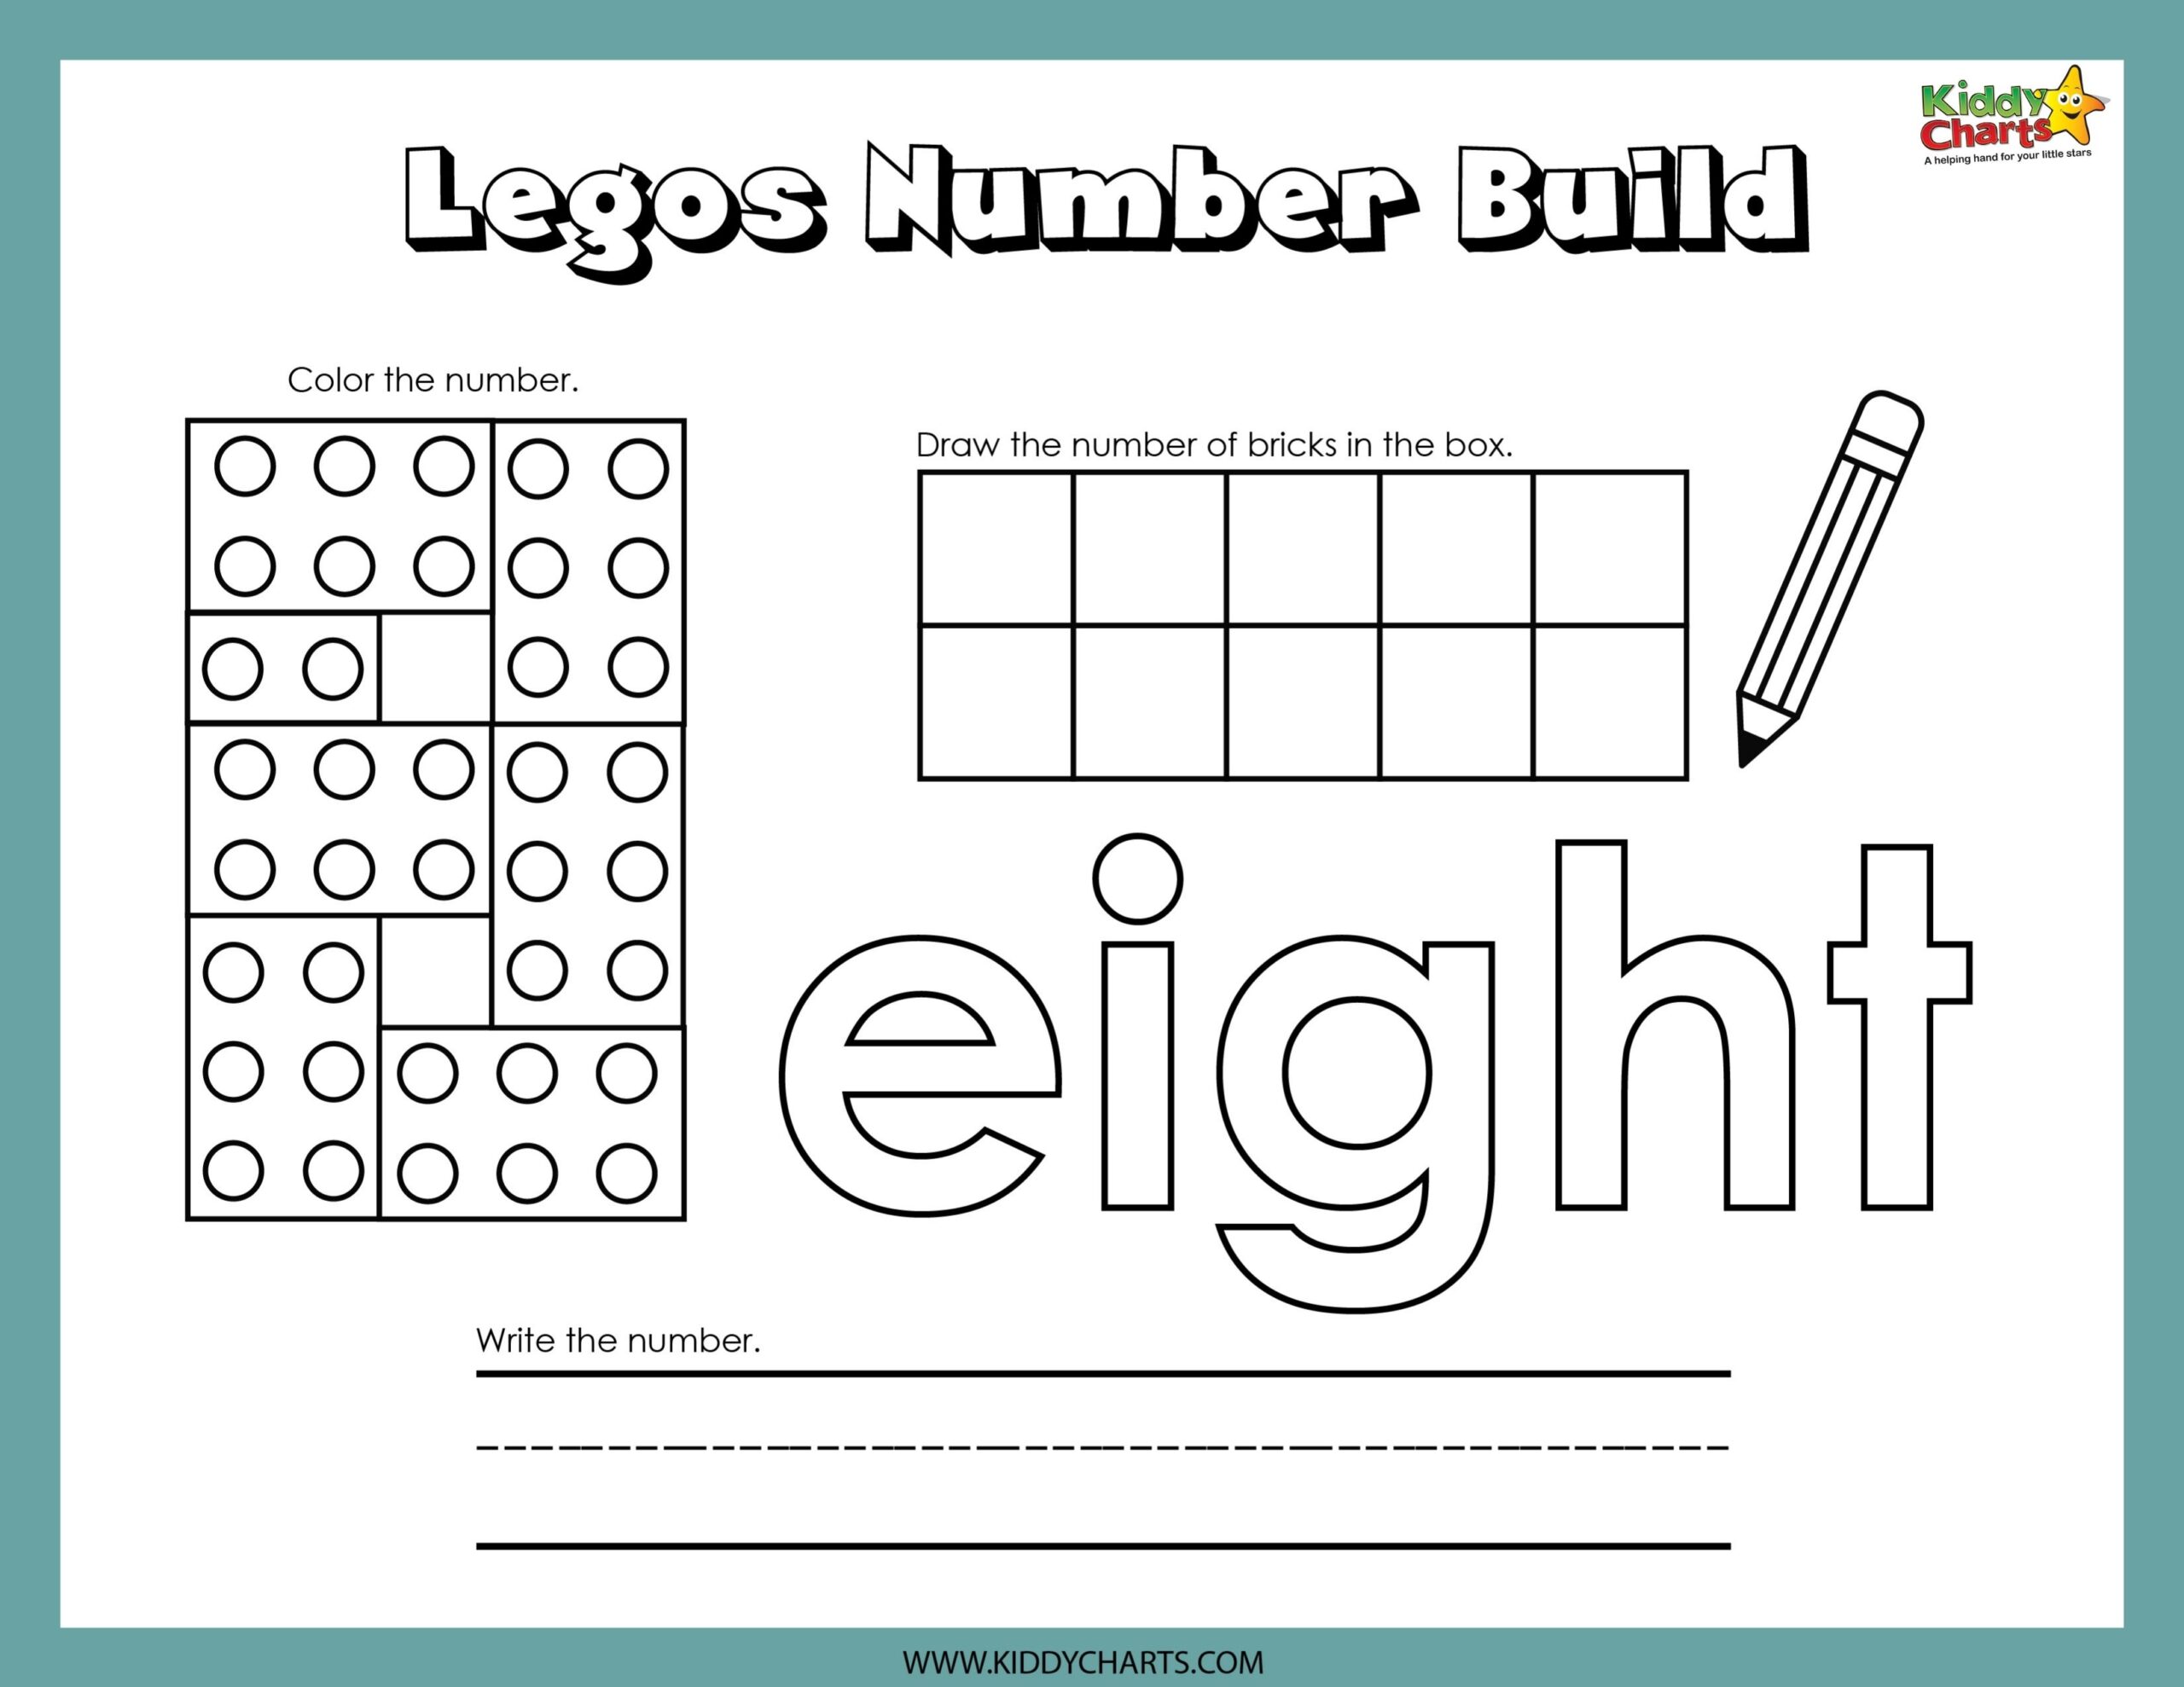 Lego Numbers Building Activity eight